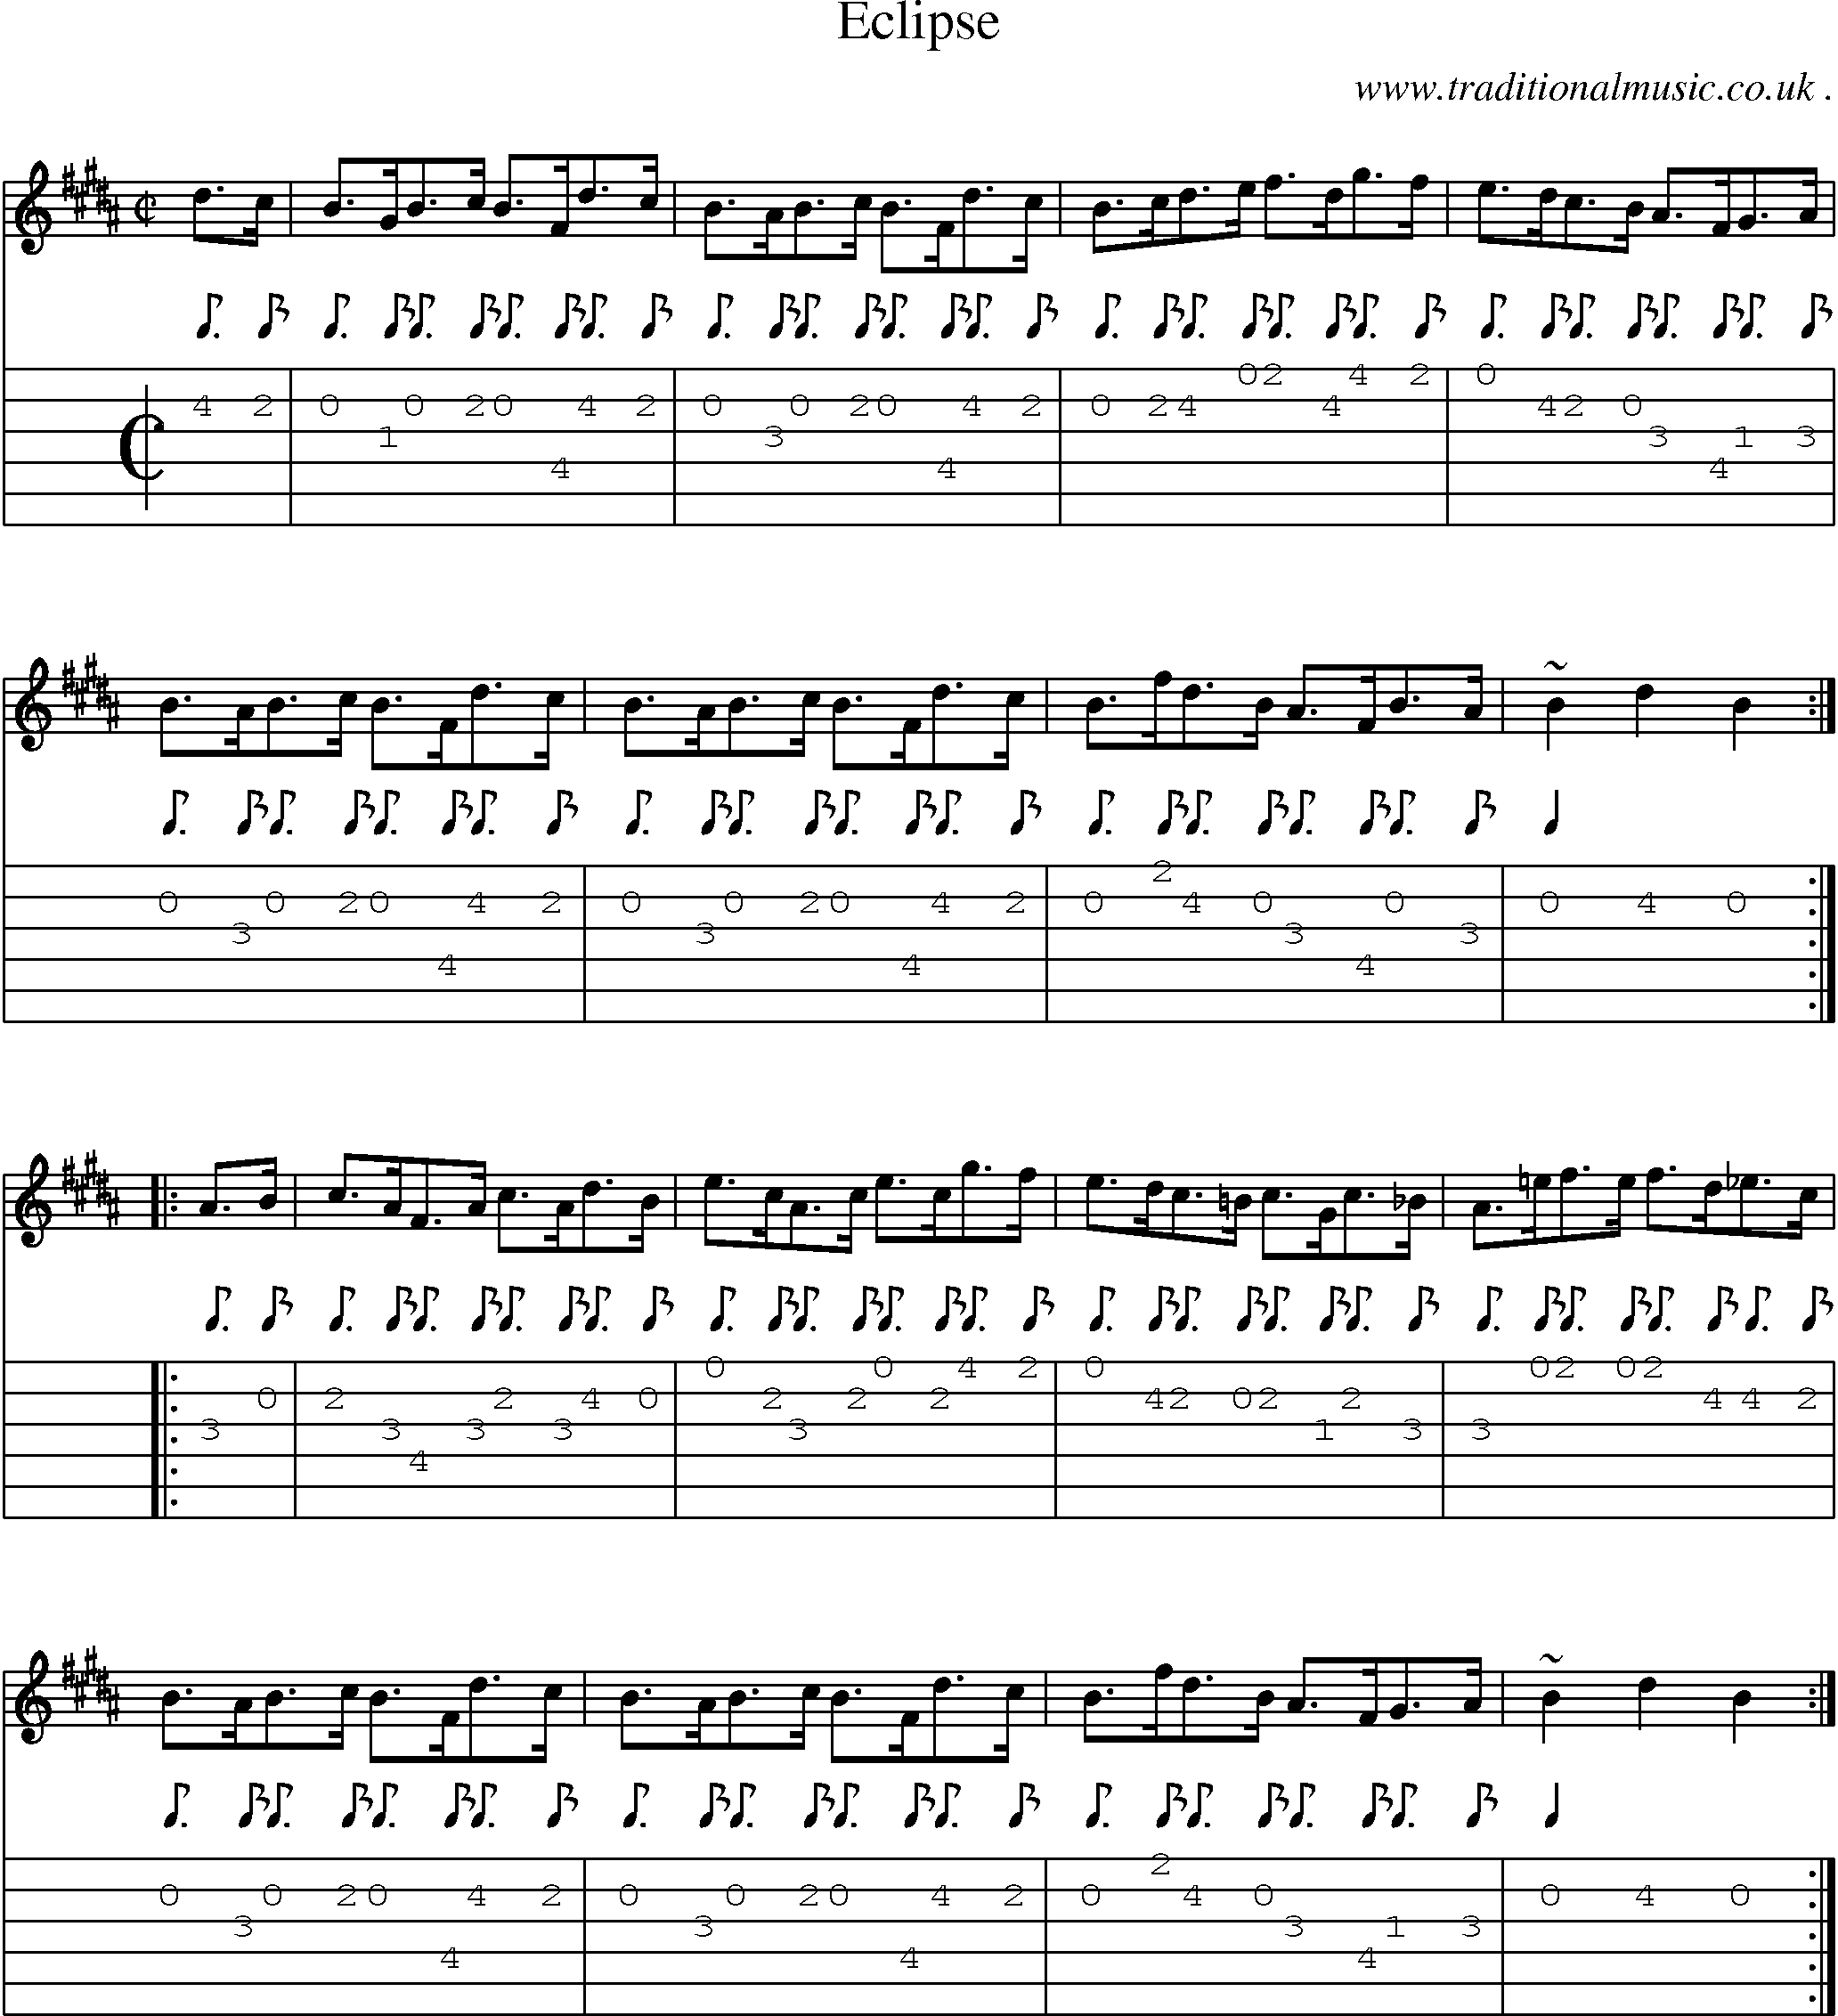 Sheet-music  score, Chords and Guitar Tabs for Eclipse